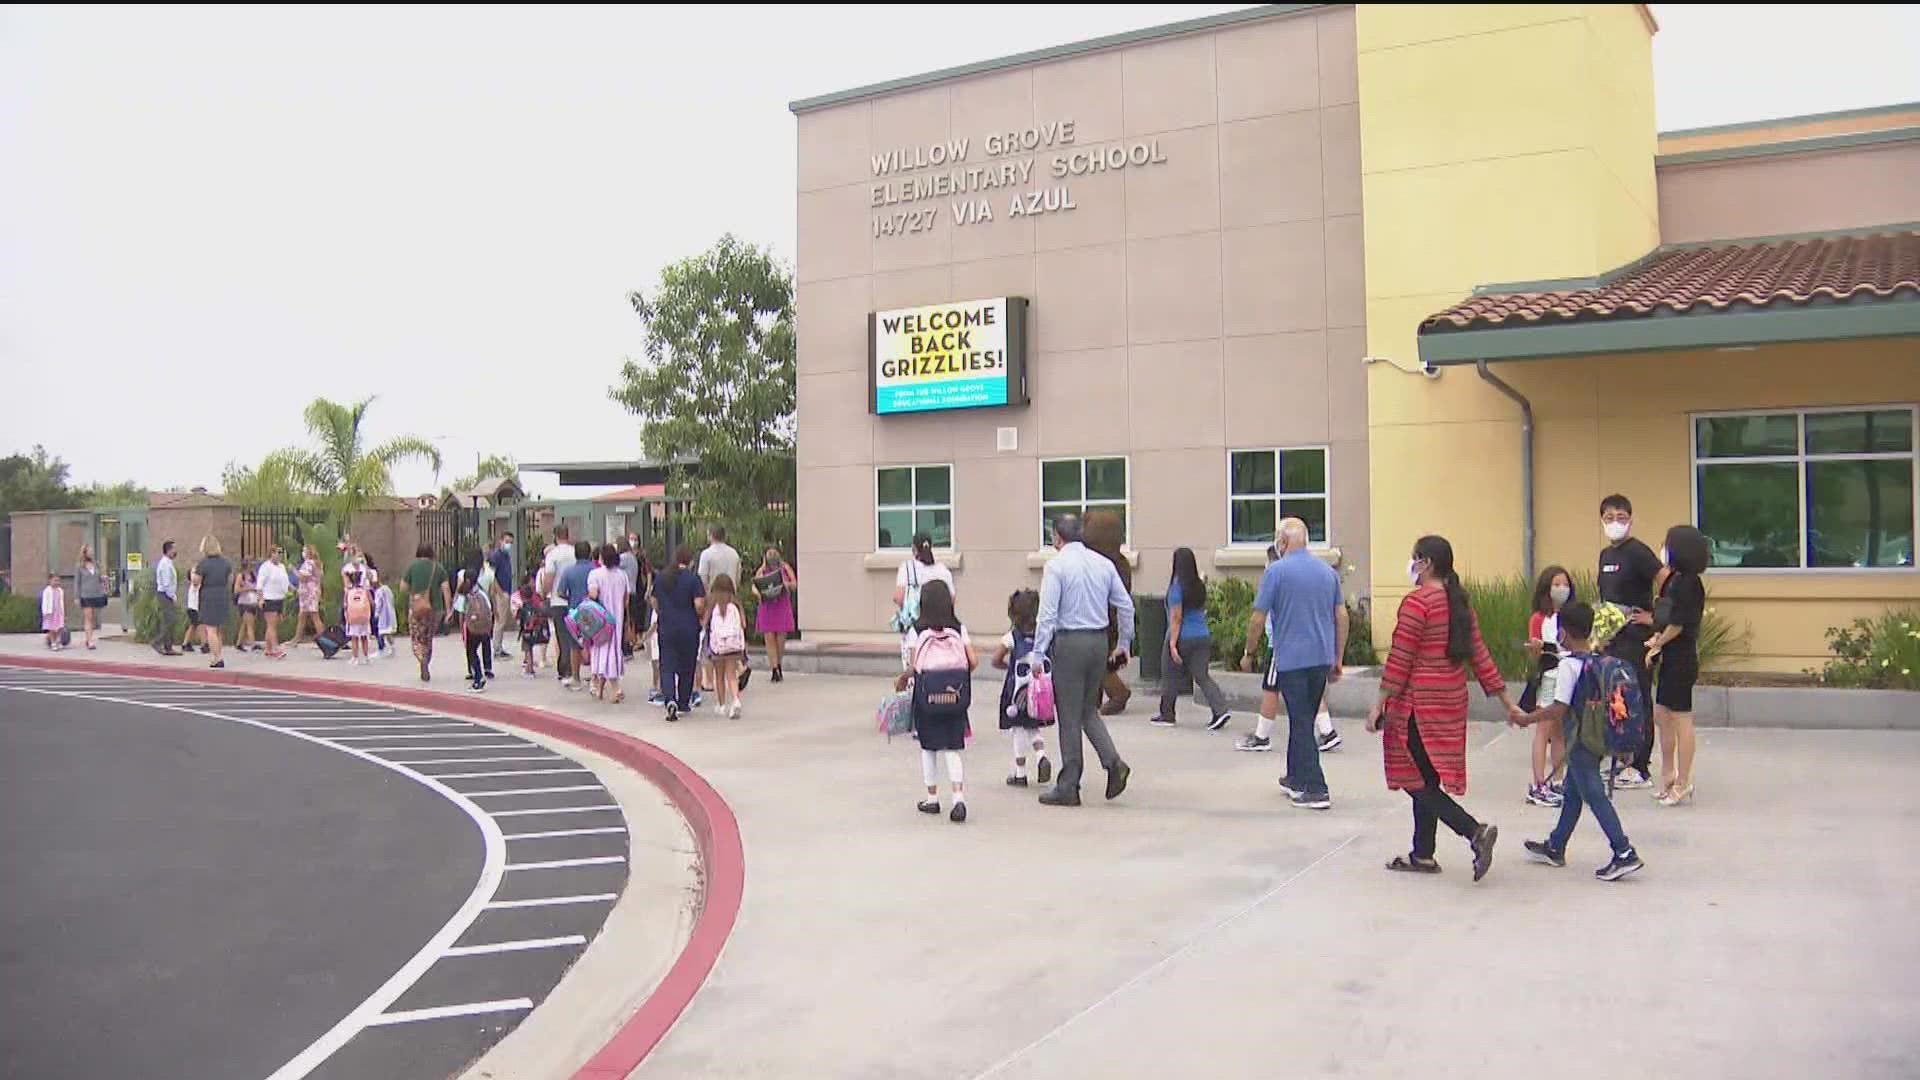 According to Poway Unified, 98% of students and their families opted to go back to school full-time in-person.